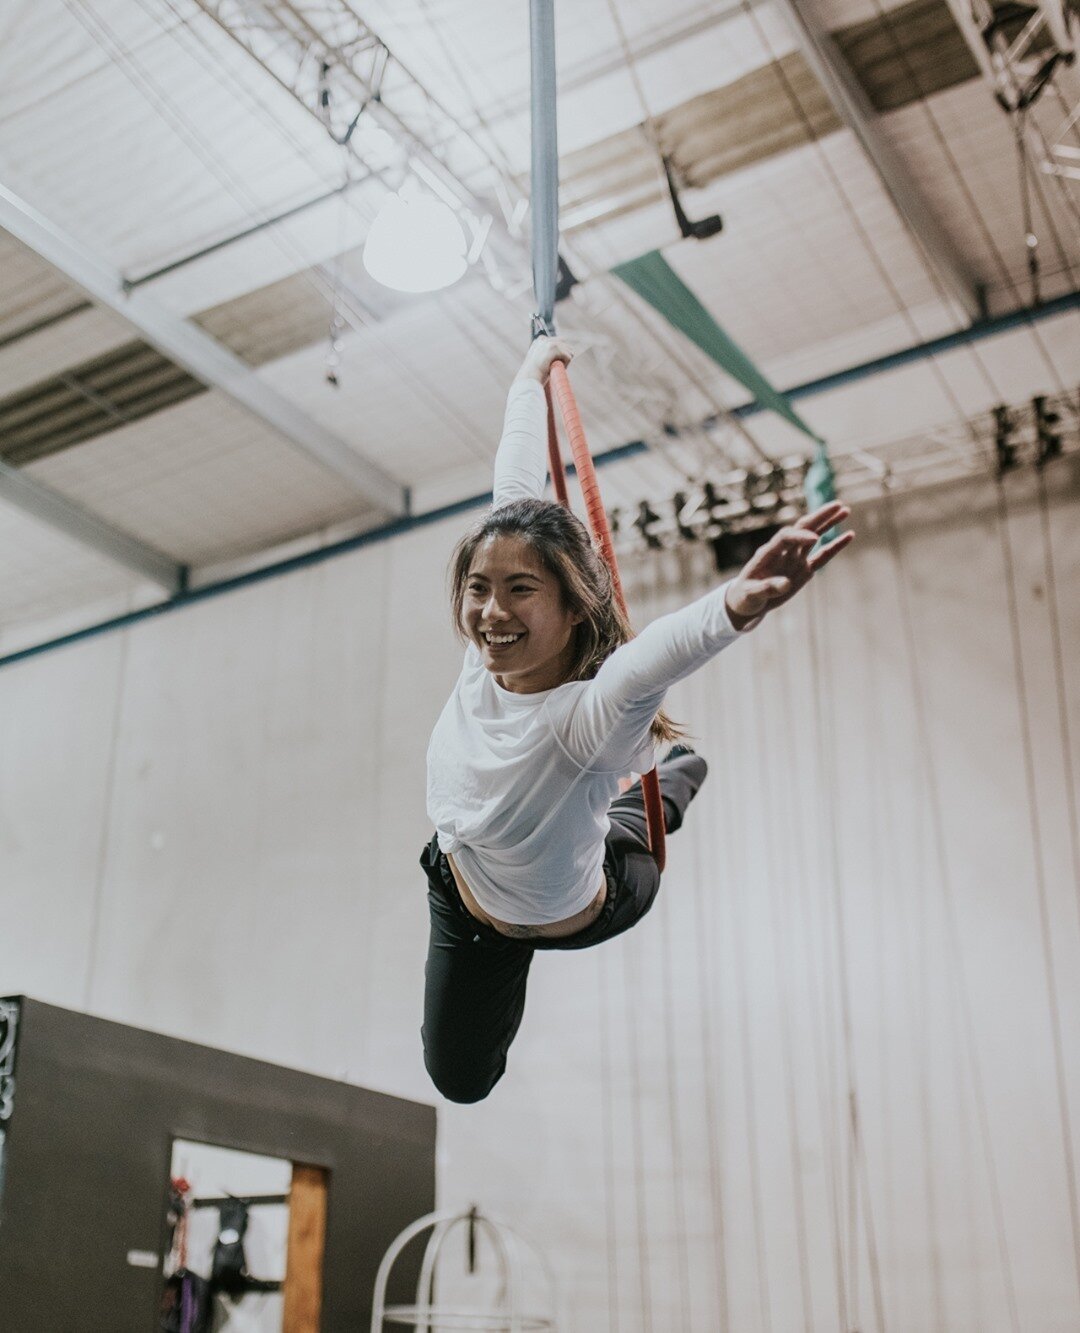 Let's reimagine our wellbeing. ⁠
⁠
@mhfnz theme of the day is: TINANA. Refuel your body. ⁠
⁠
I know that moving my body in circus always helps my mental wellbeing. A hoop is not always accessible, but even imagining having a play and a stretch brings